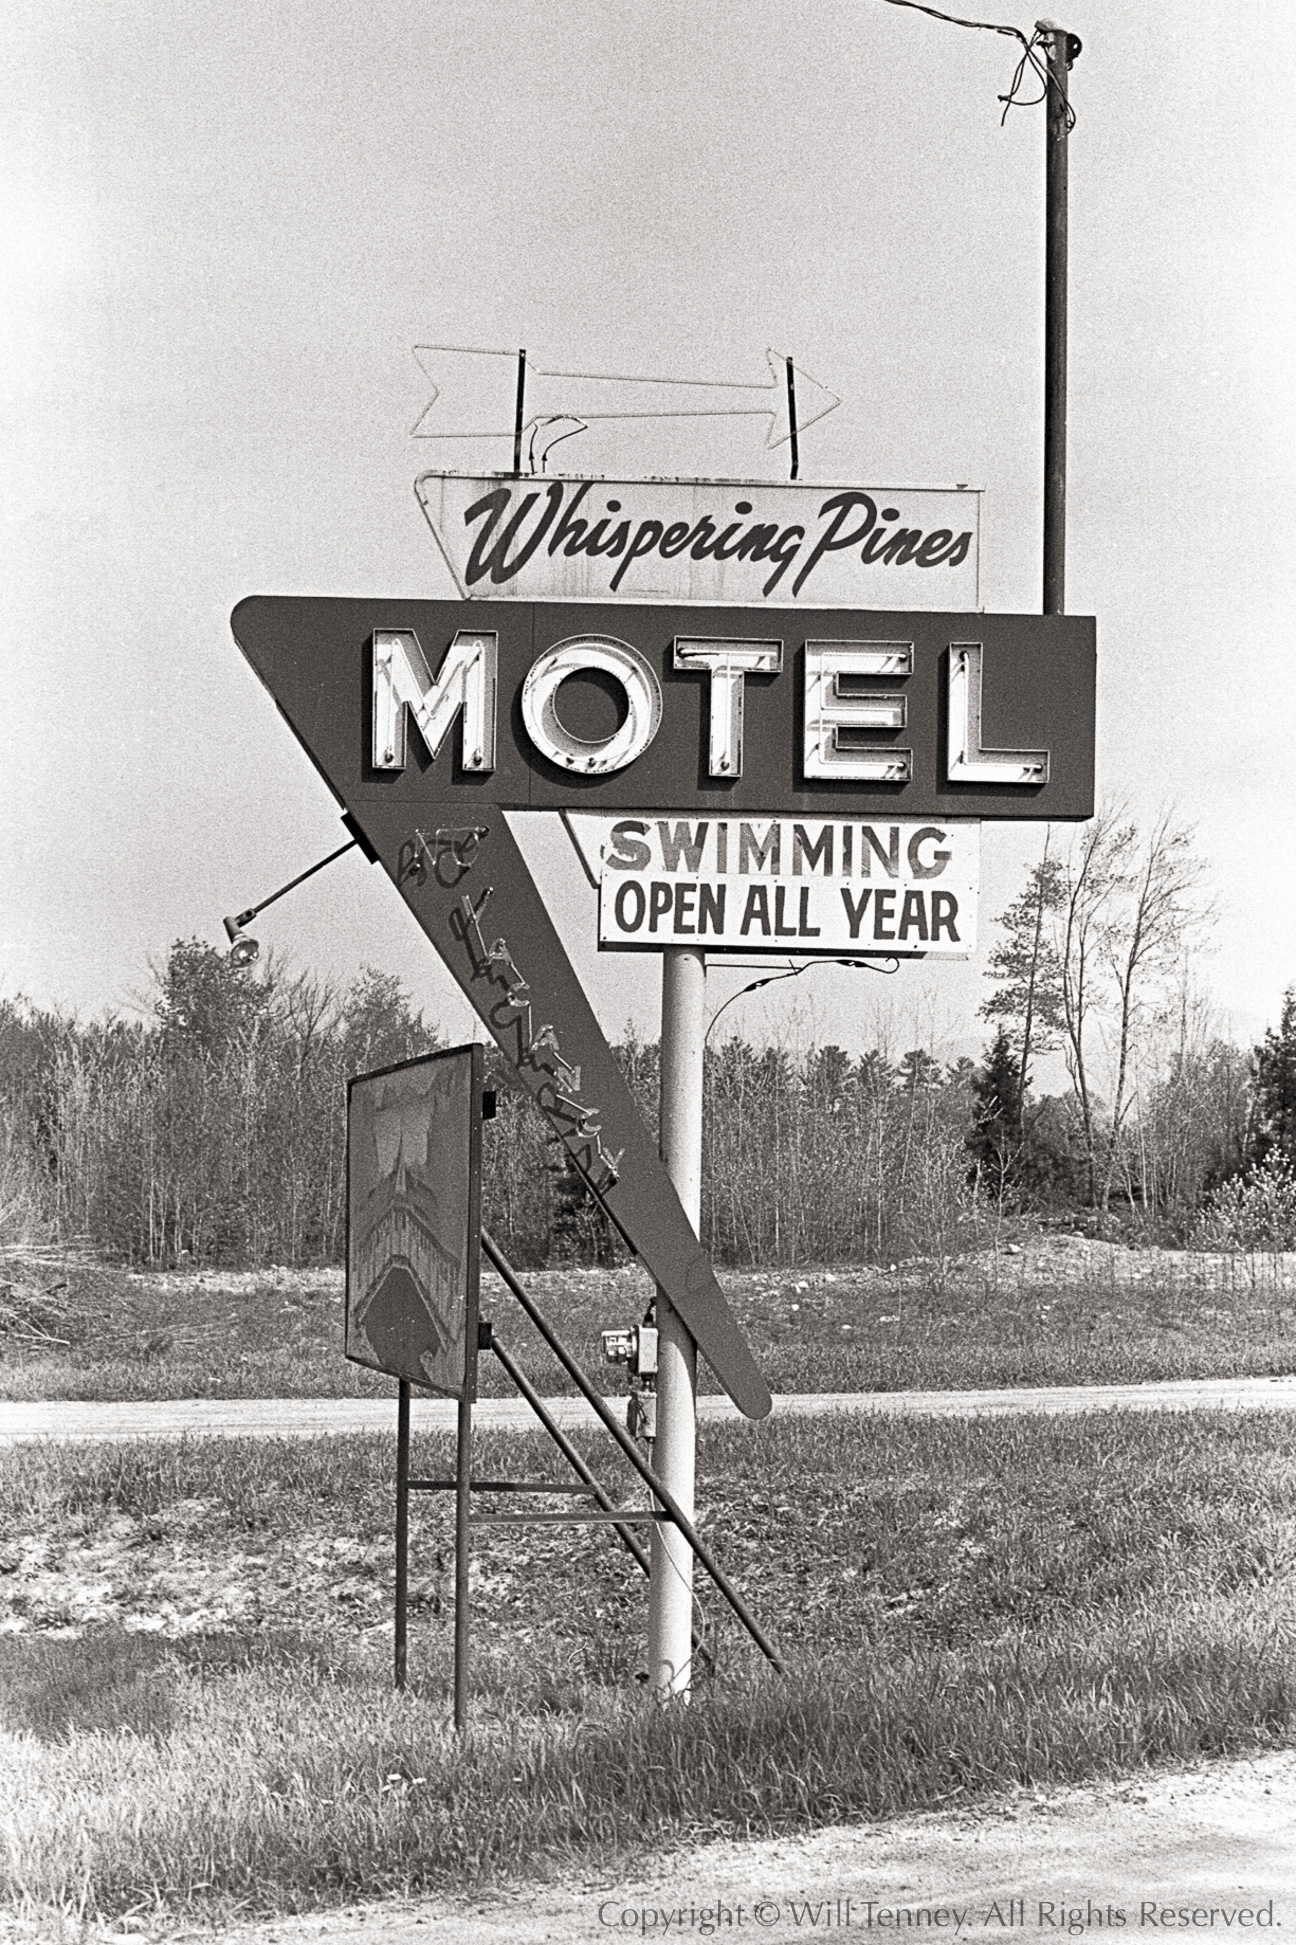 Whispering Pines Motel: Photograph by Will Tenney